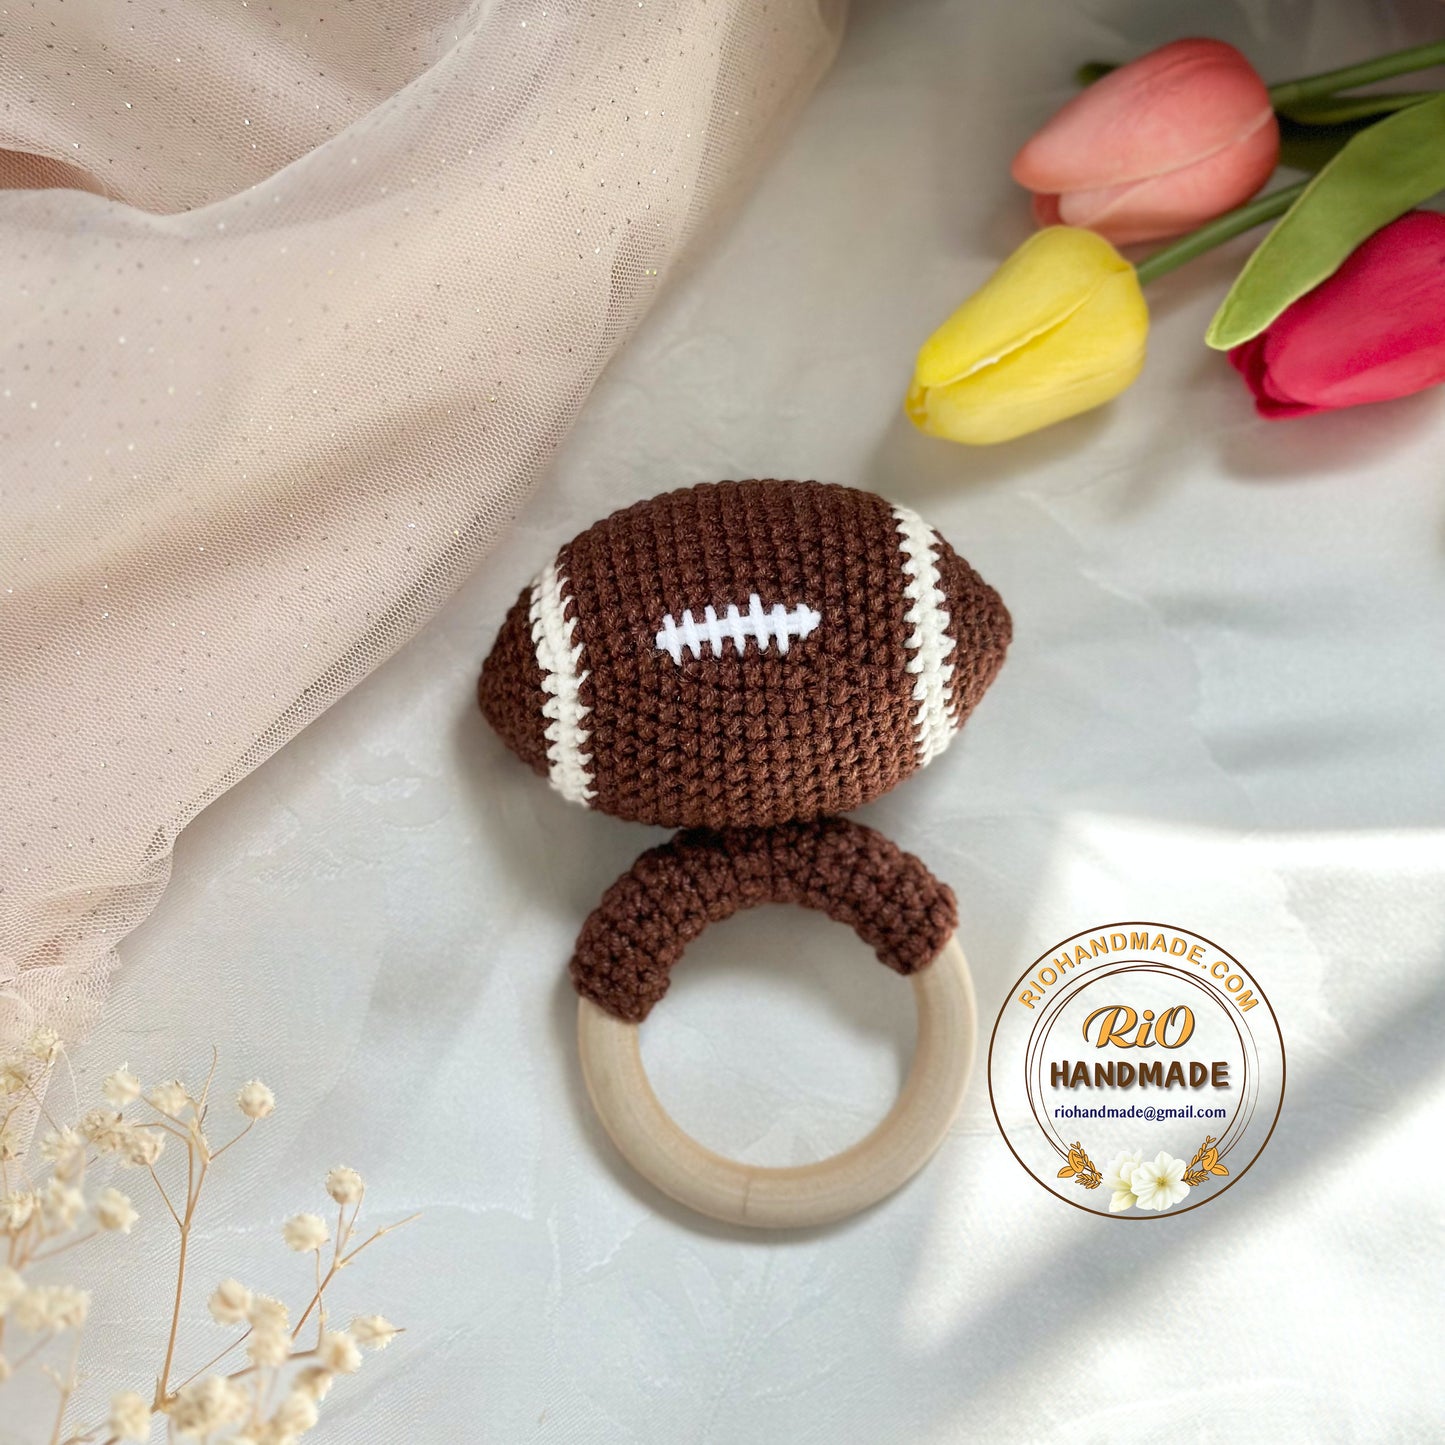 Personalized Baby Gift, Baby Rattle Football, Gift For Baby, American Football Crochet, Sport Toy, Sport Baby Shower